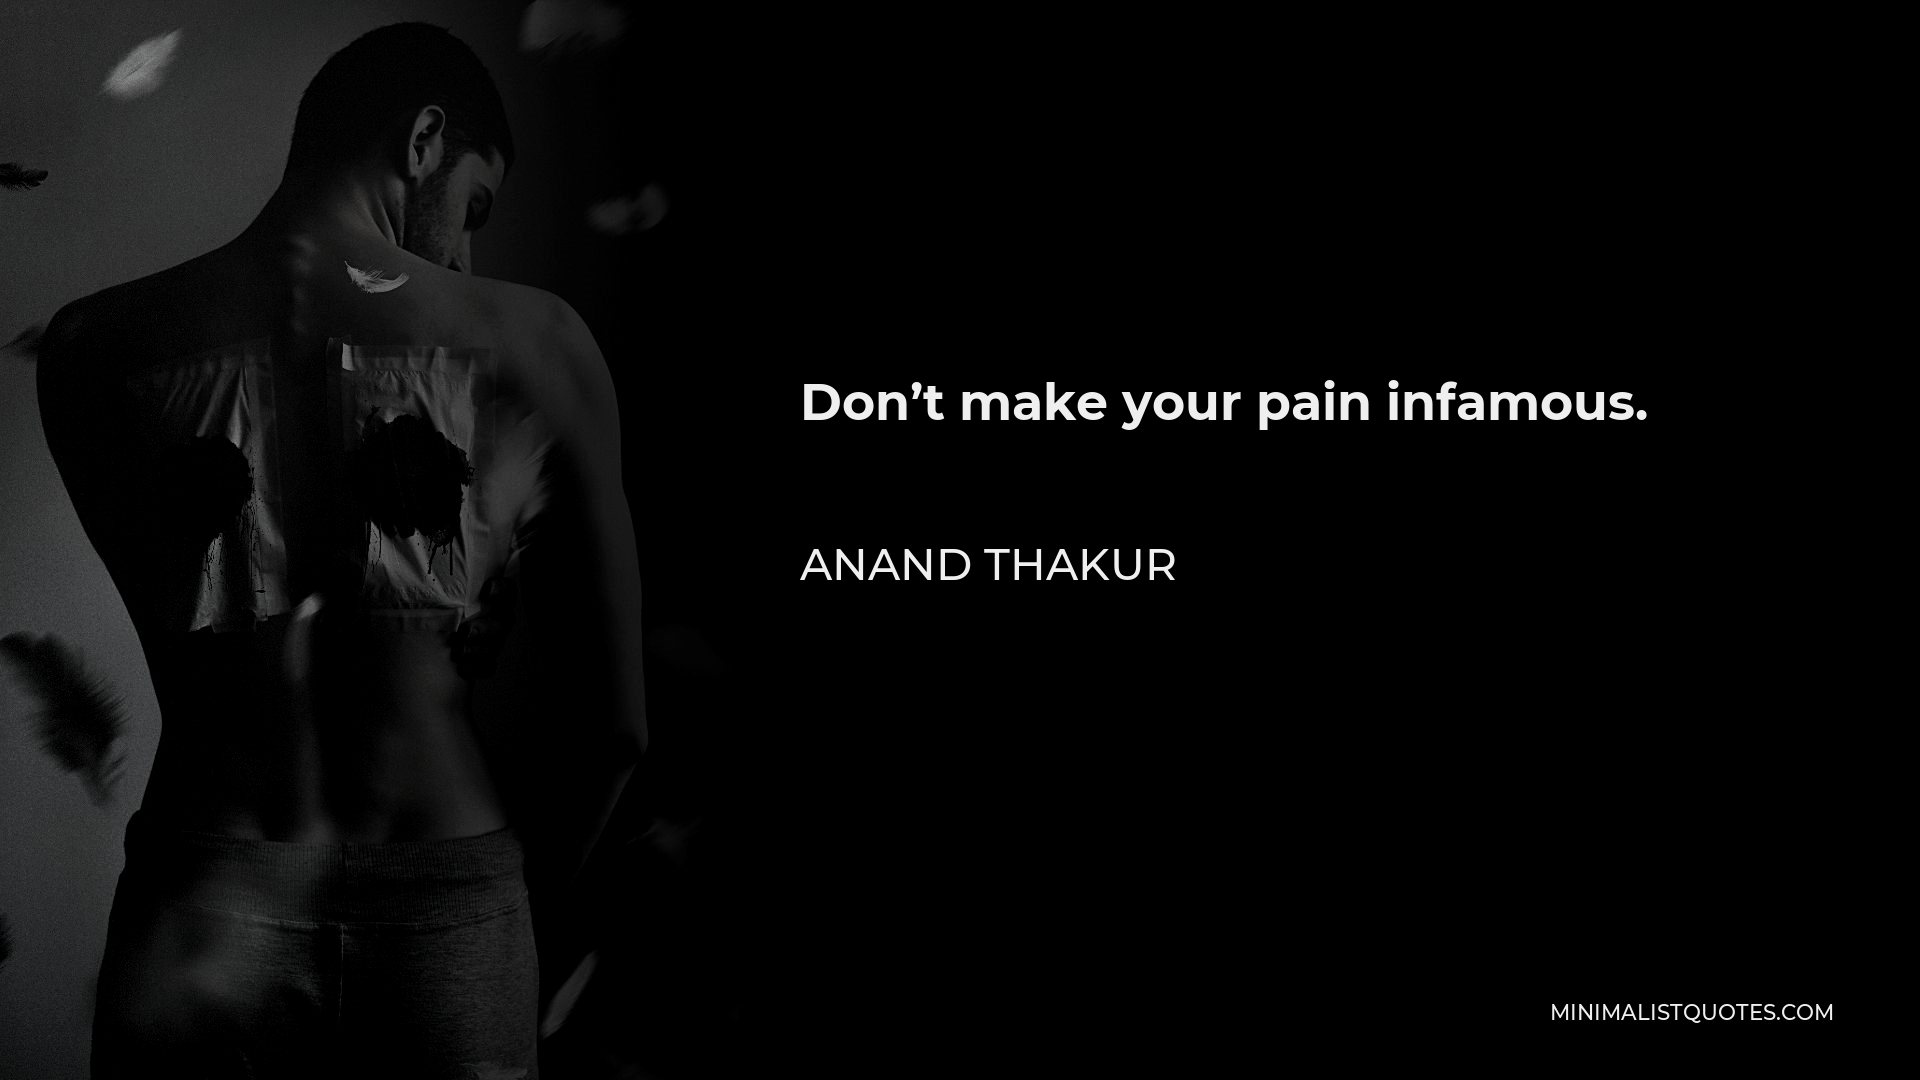 Anand Thakur Quote - Don’t make your pain infamous.